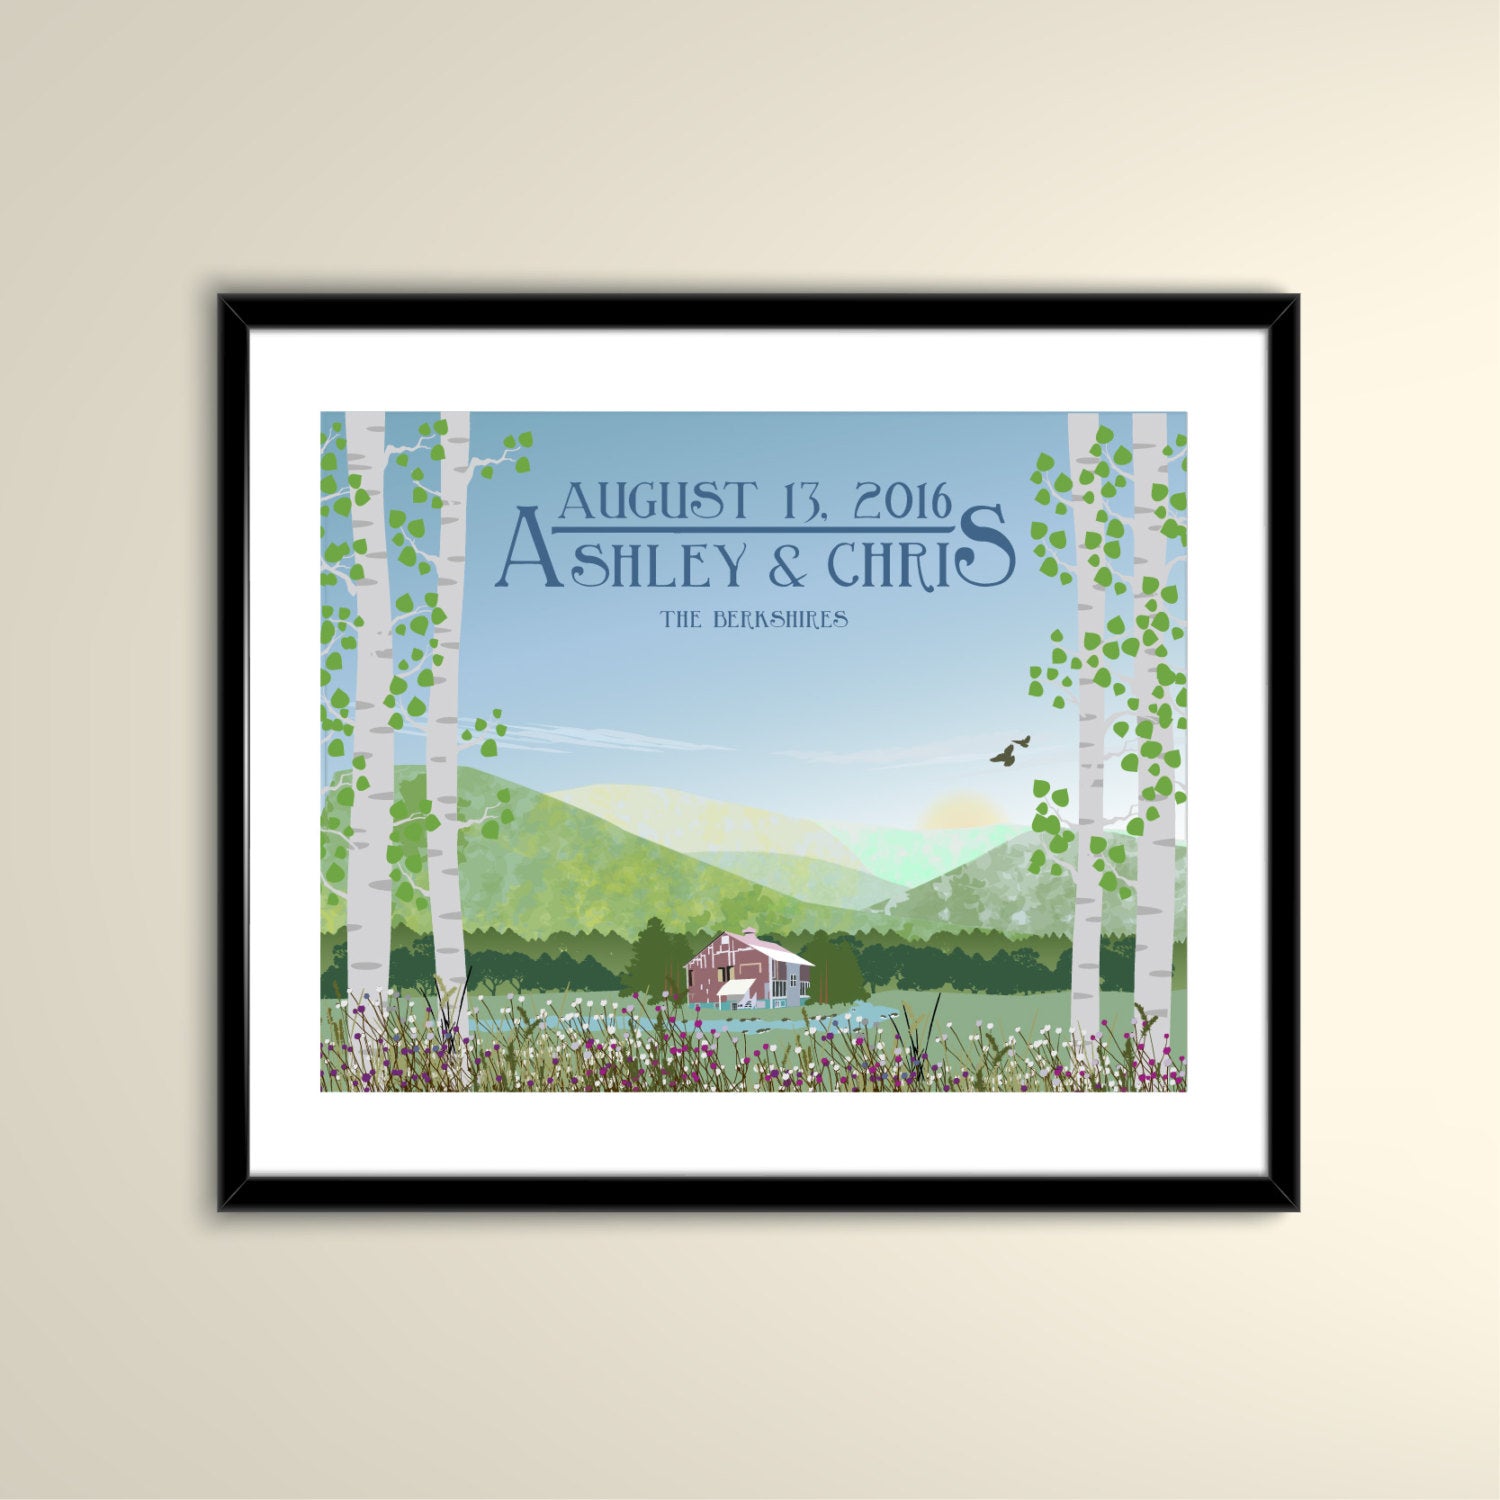 The Berkshires with Barn Vintage Travel 11x14 Paper Poster - Wedding Poster personalized with Names and date (frame not included)